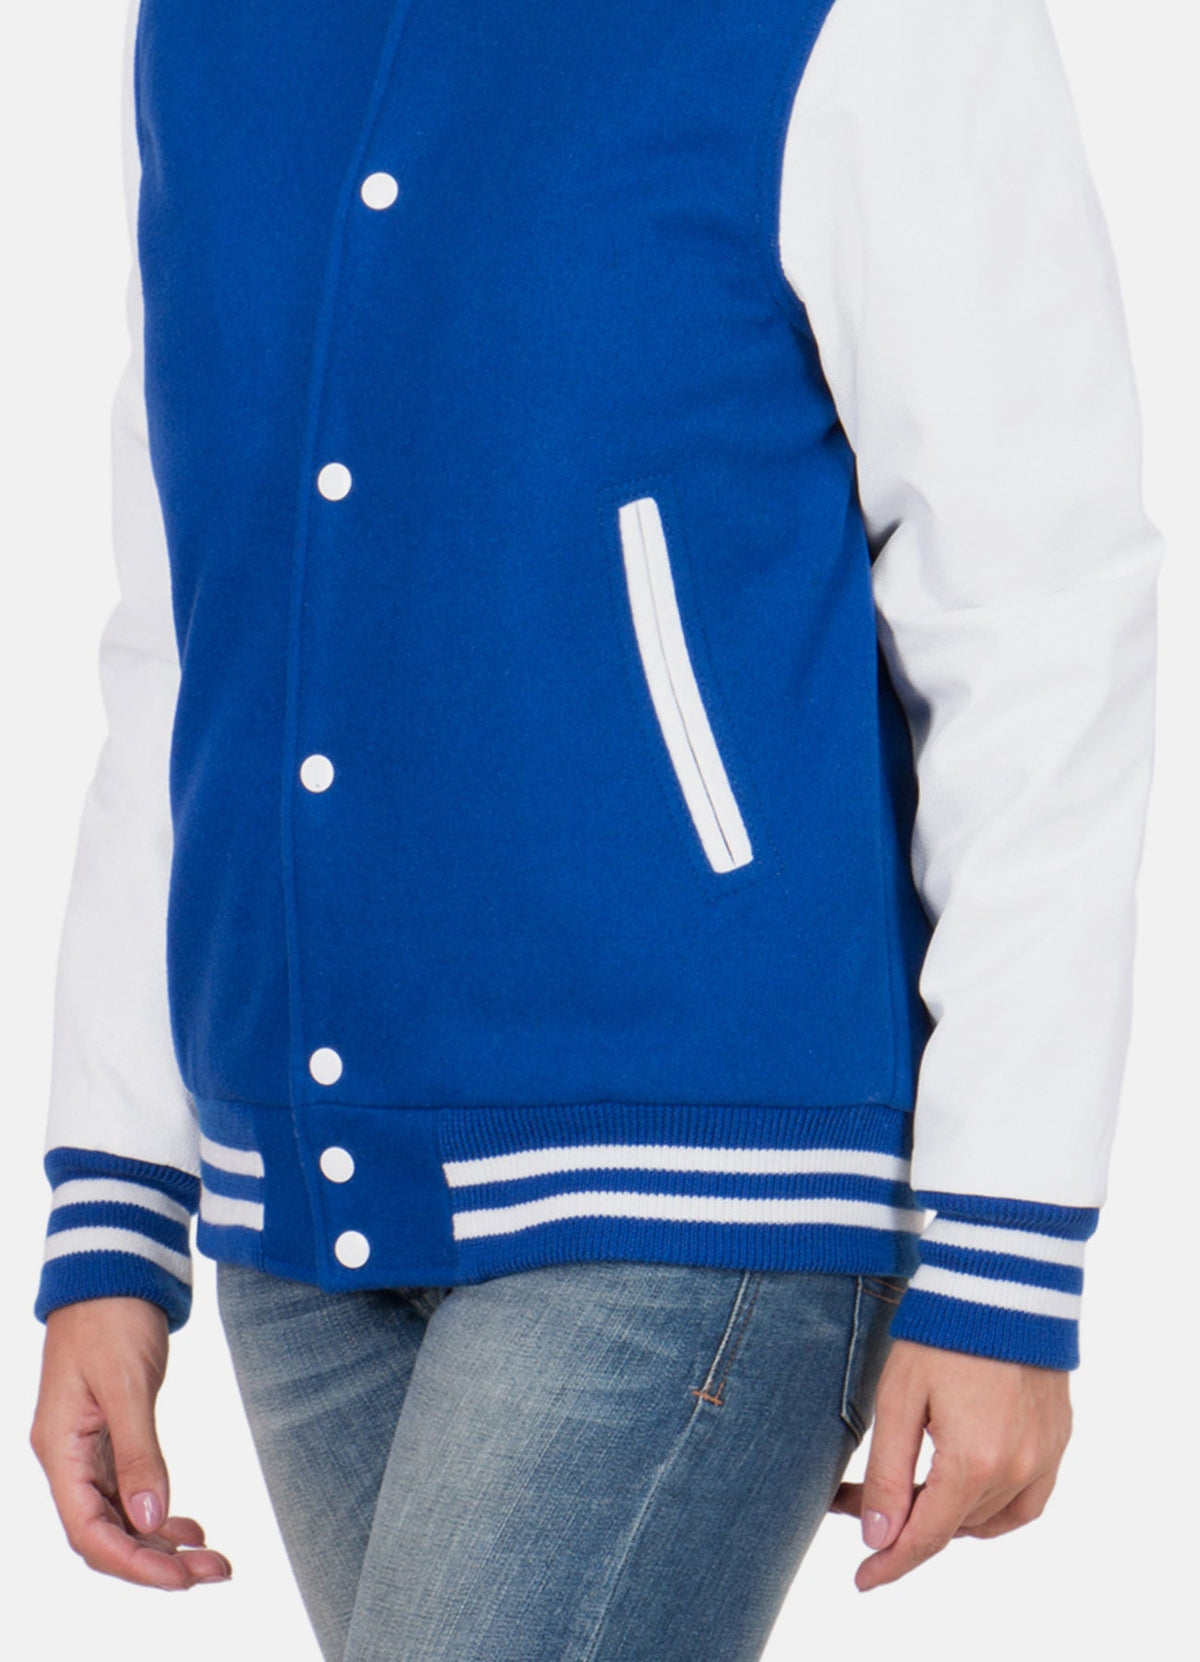 Womens Casual Blue and White Varsity Jacket